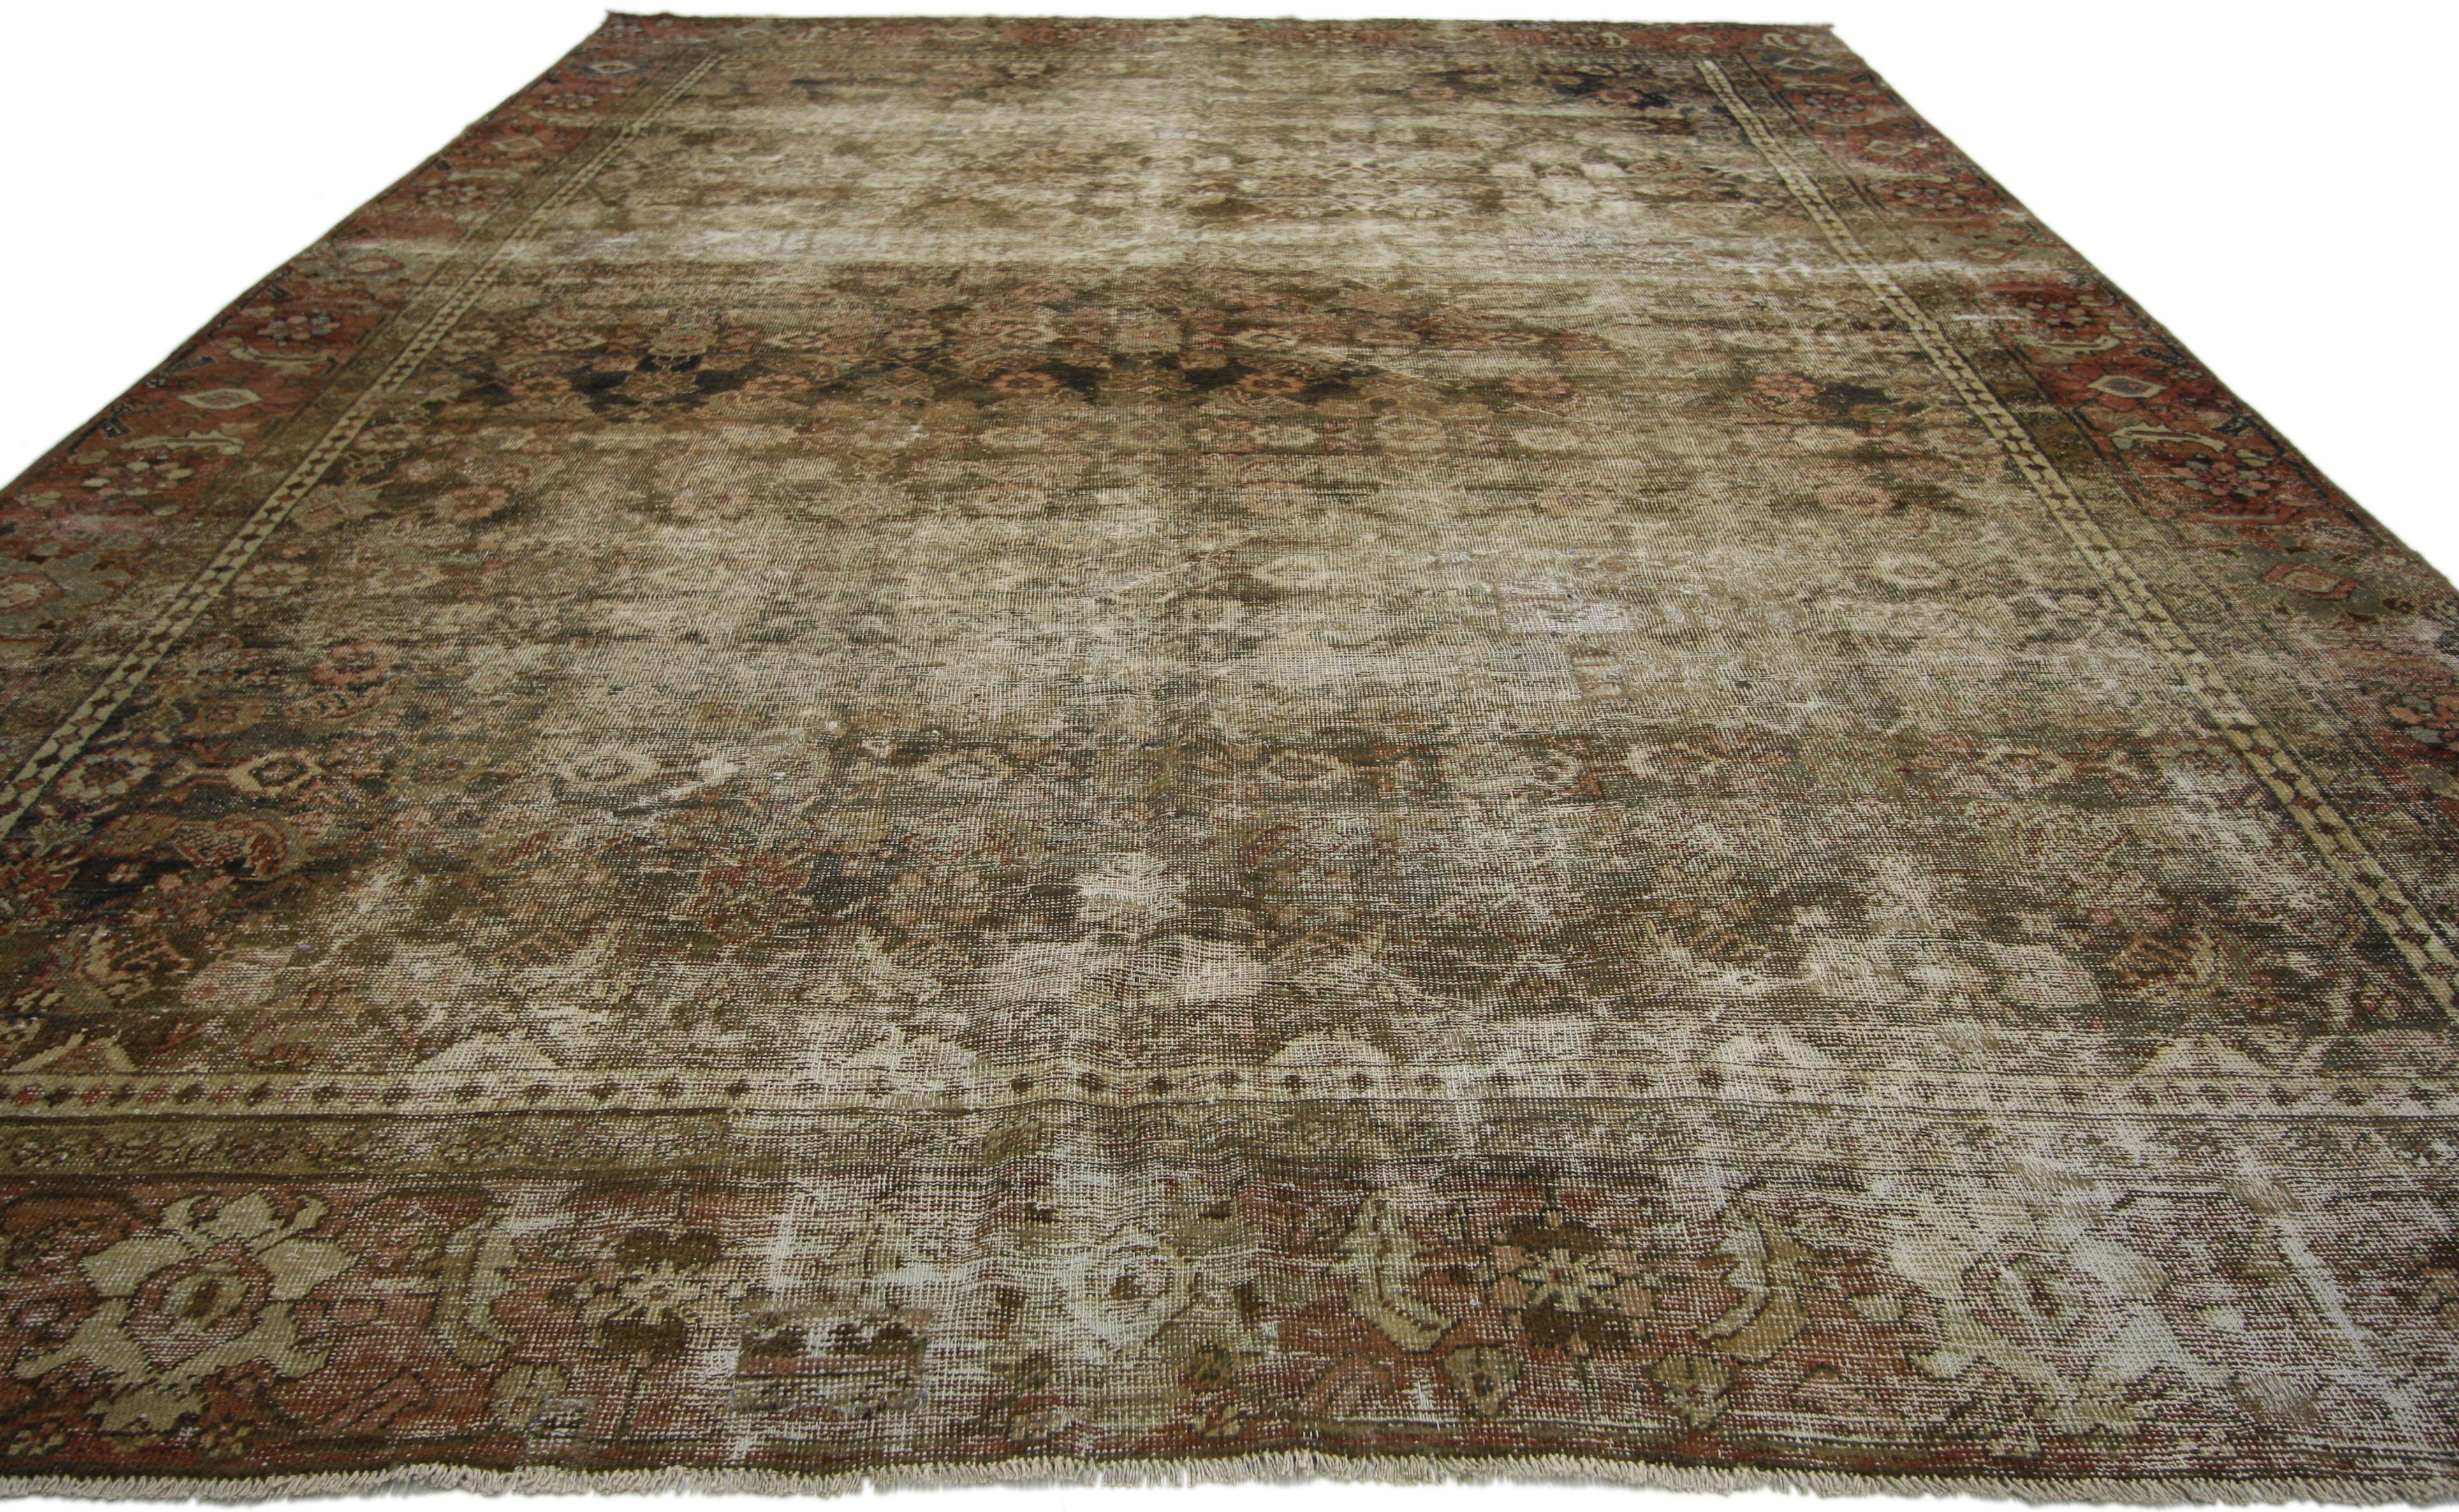 Hand-Knotted Distressed Antique Persian Mahal Rug with Modern Industrial Style